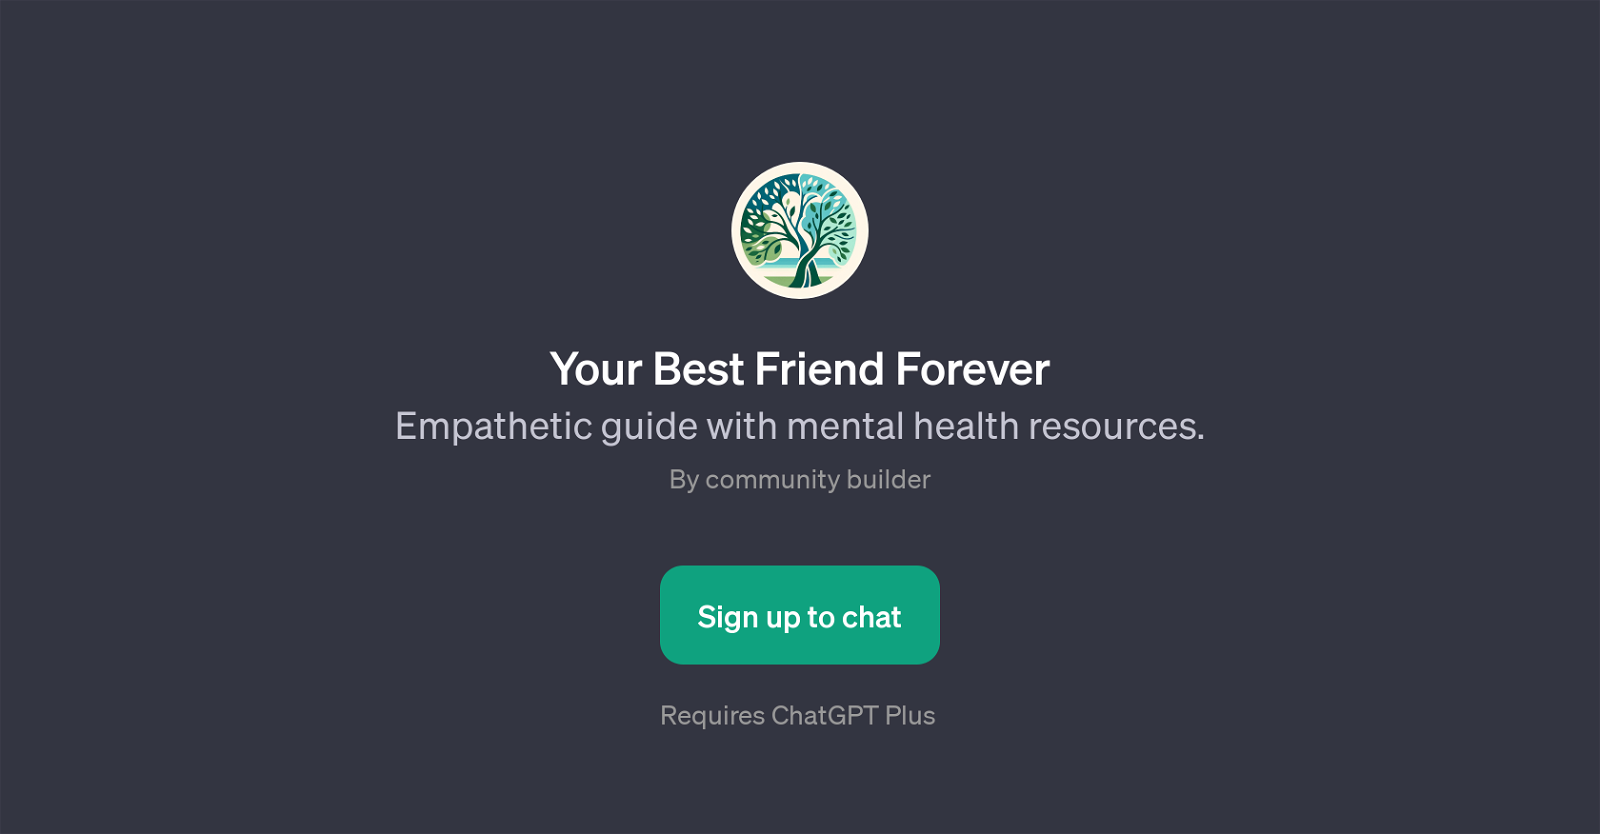 Your Best Friend Forever website